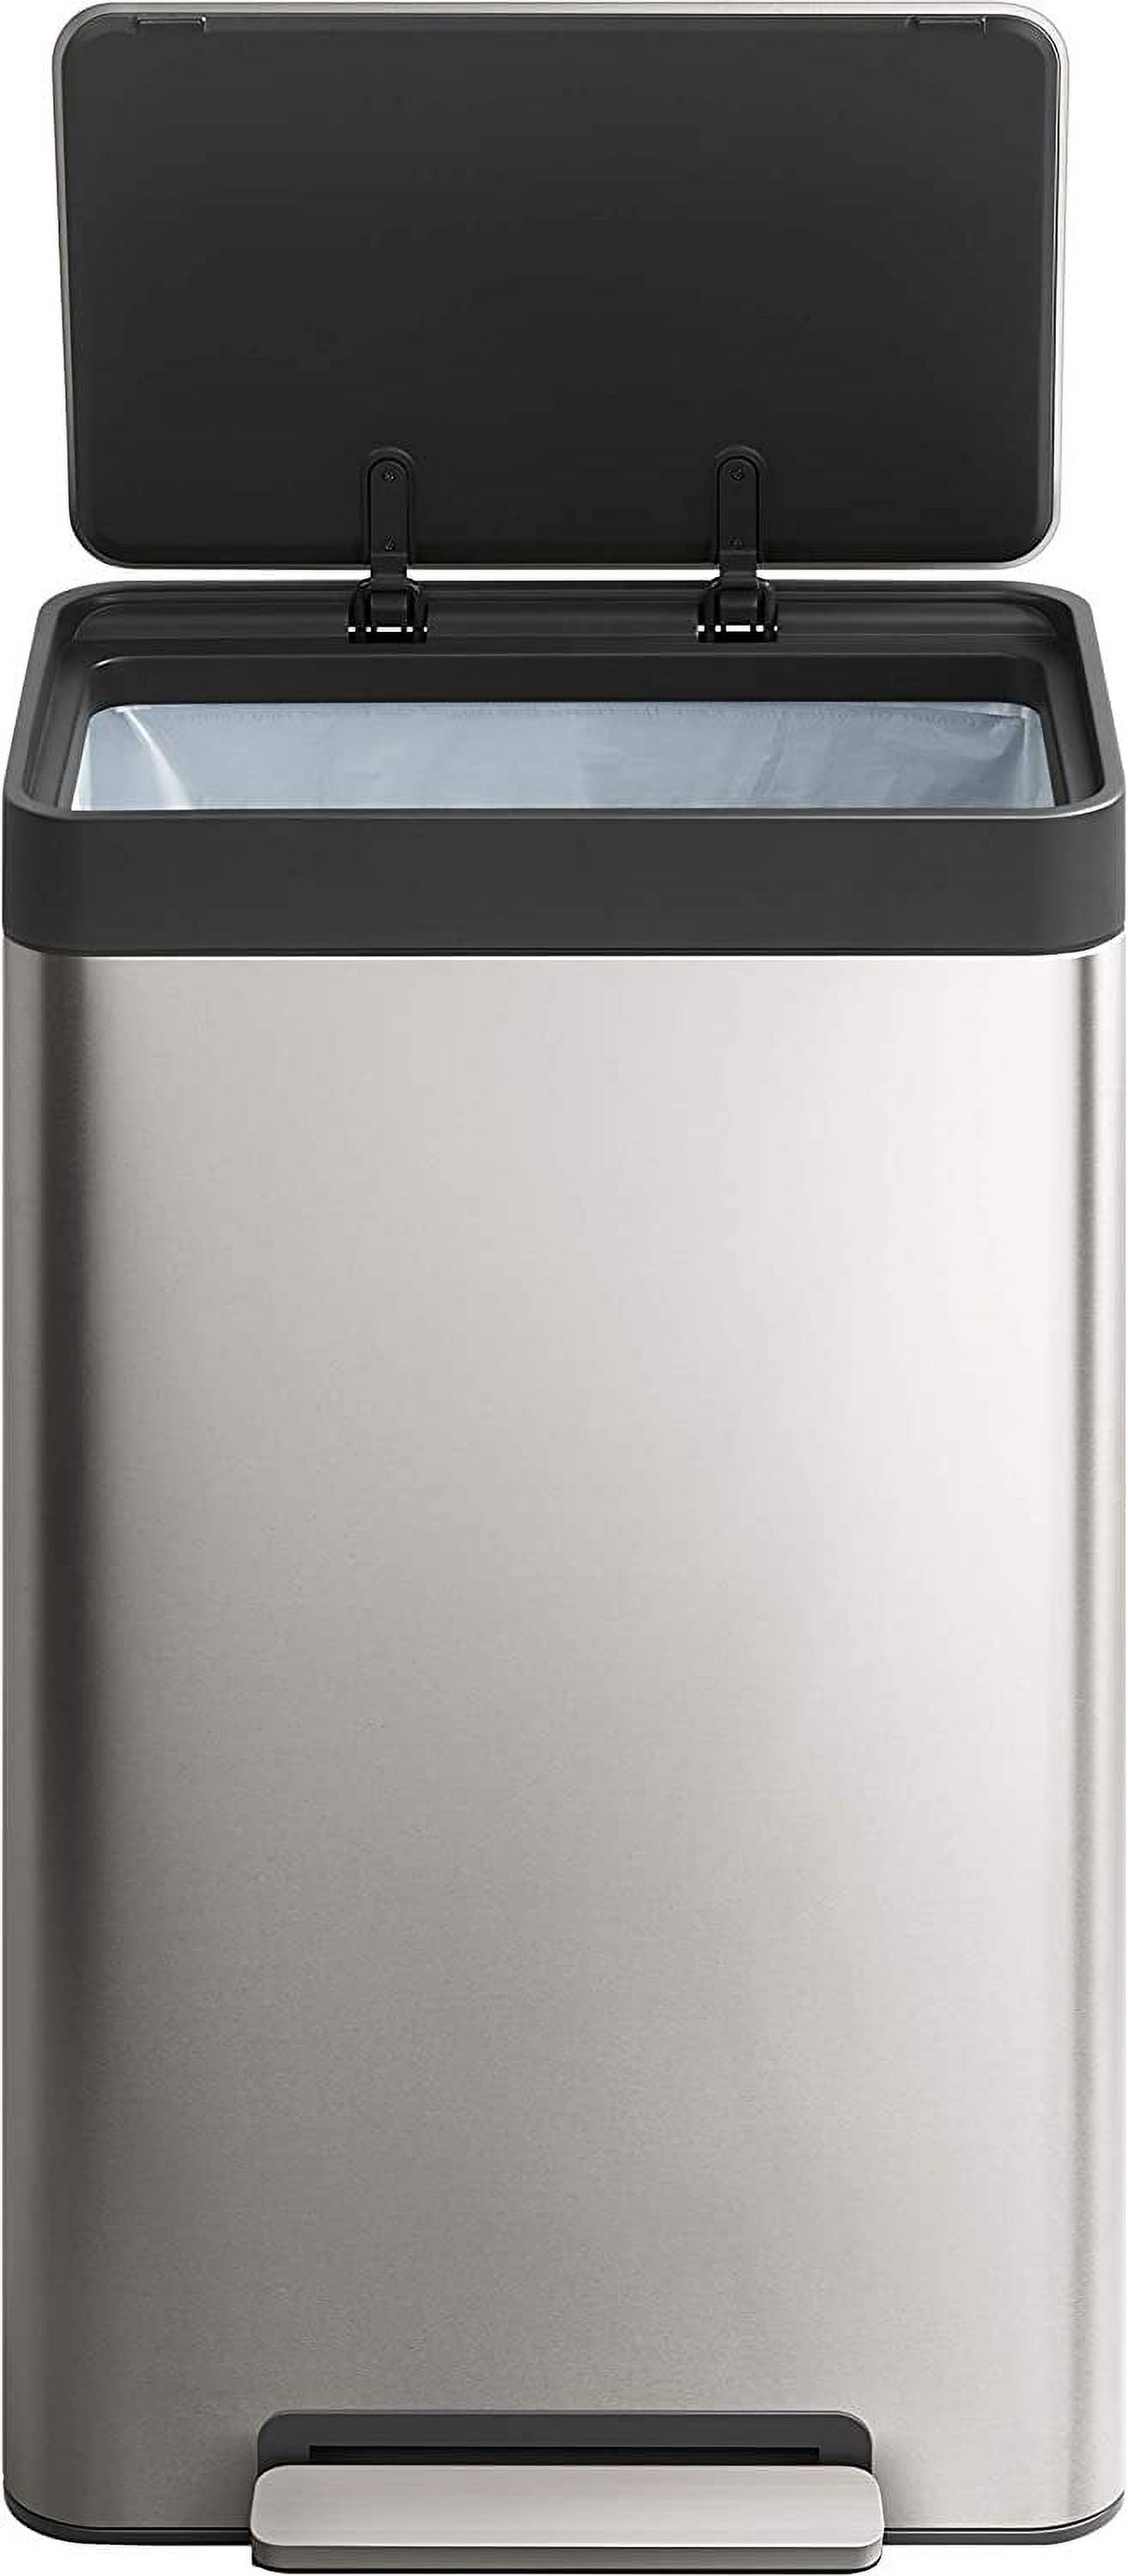 KOHLER 13 Gal. Stainless Steel Trash Can in Black Stainless K-20940-BST -  The Home Depot